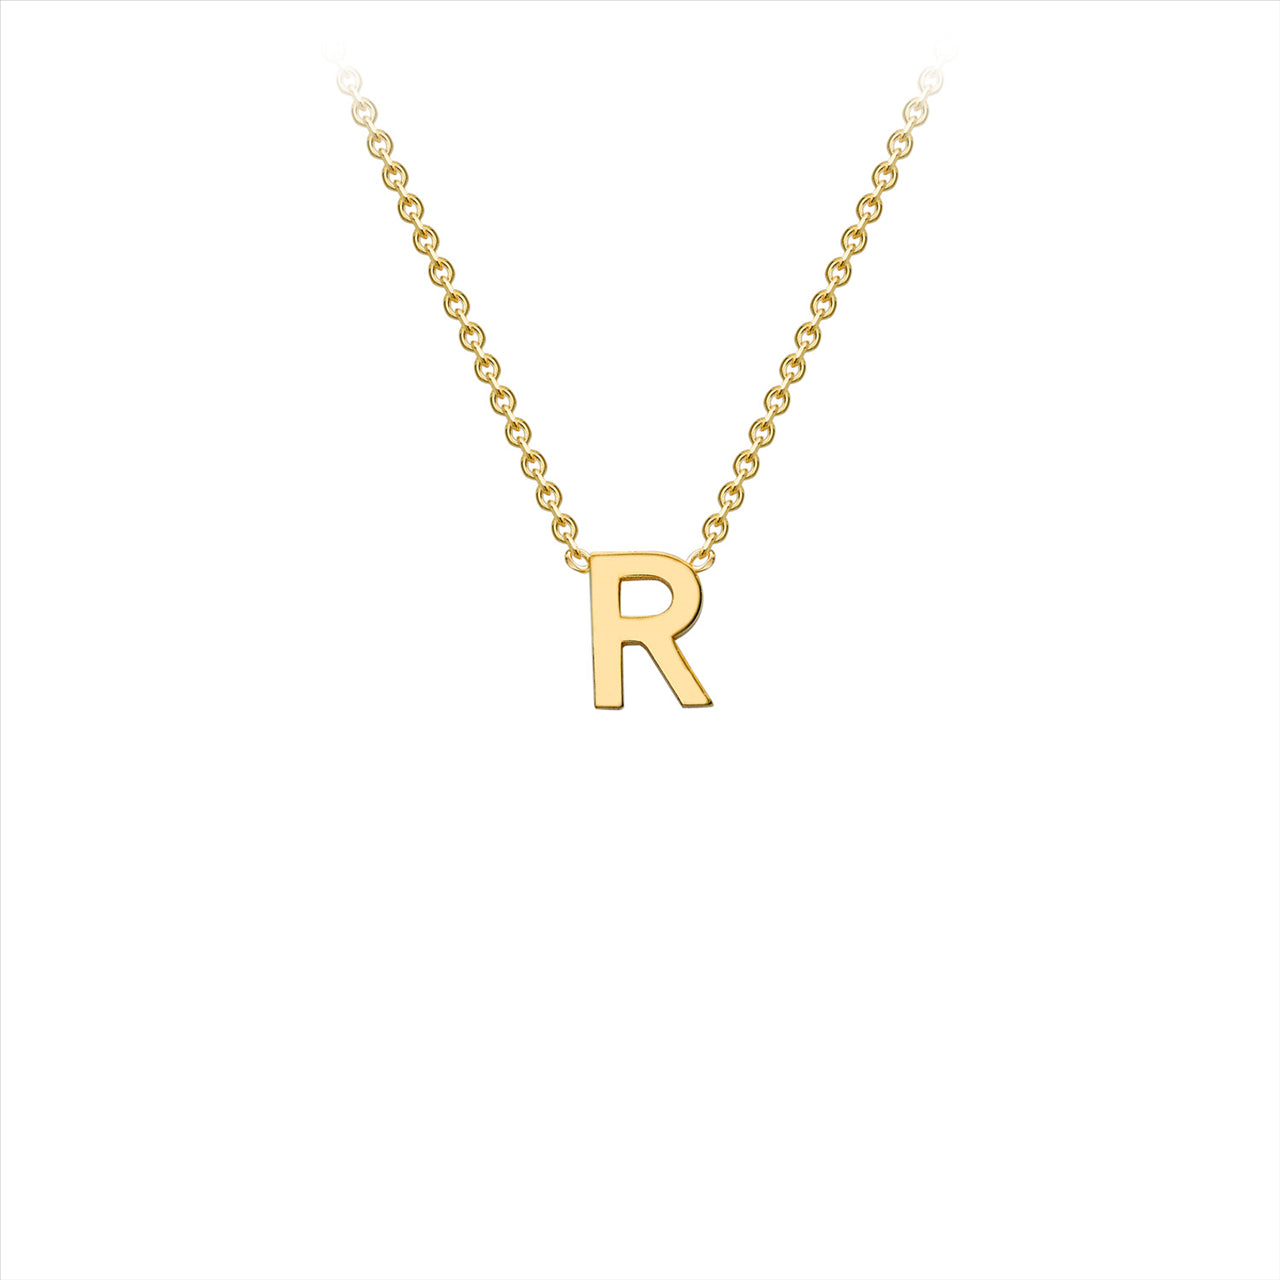 9K Yellow Gold 'R' Initial Adjustable Necklace 38cm-43cm